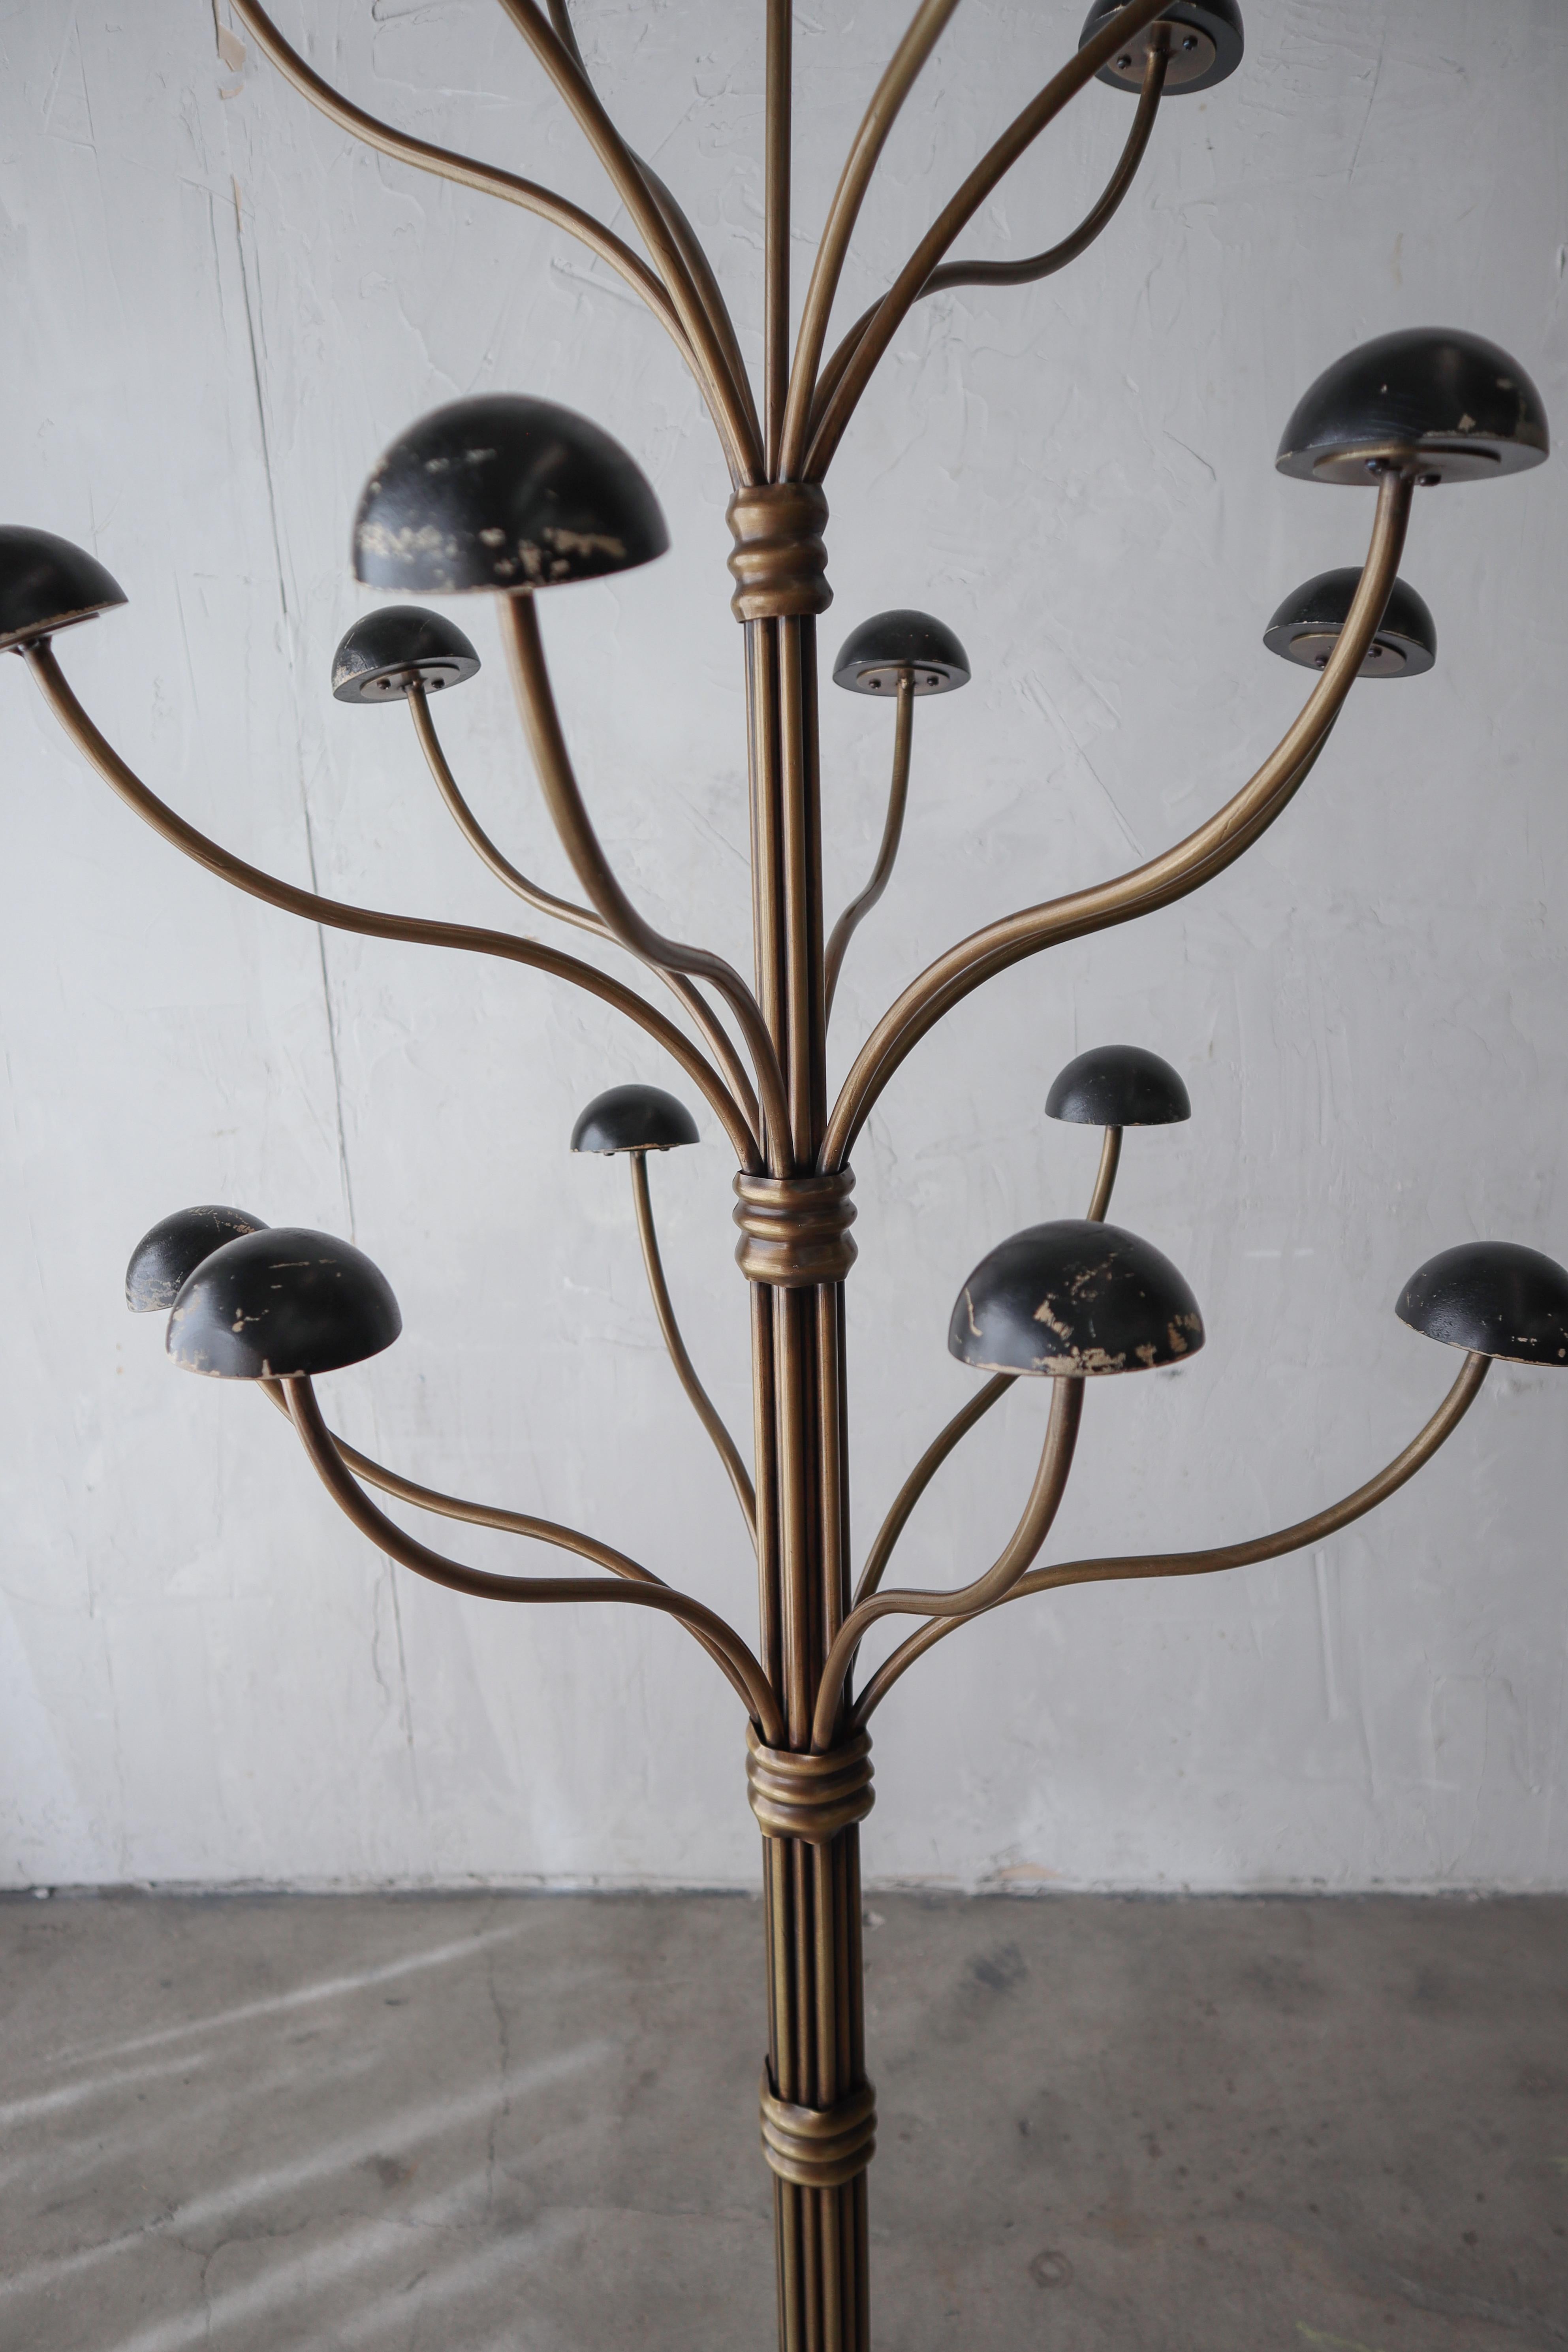 Antique Bronze 19 Arm Millinery Hat Display Rack In Good Condition For Sale In Las Vegas, NV